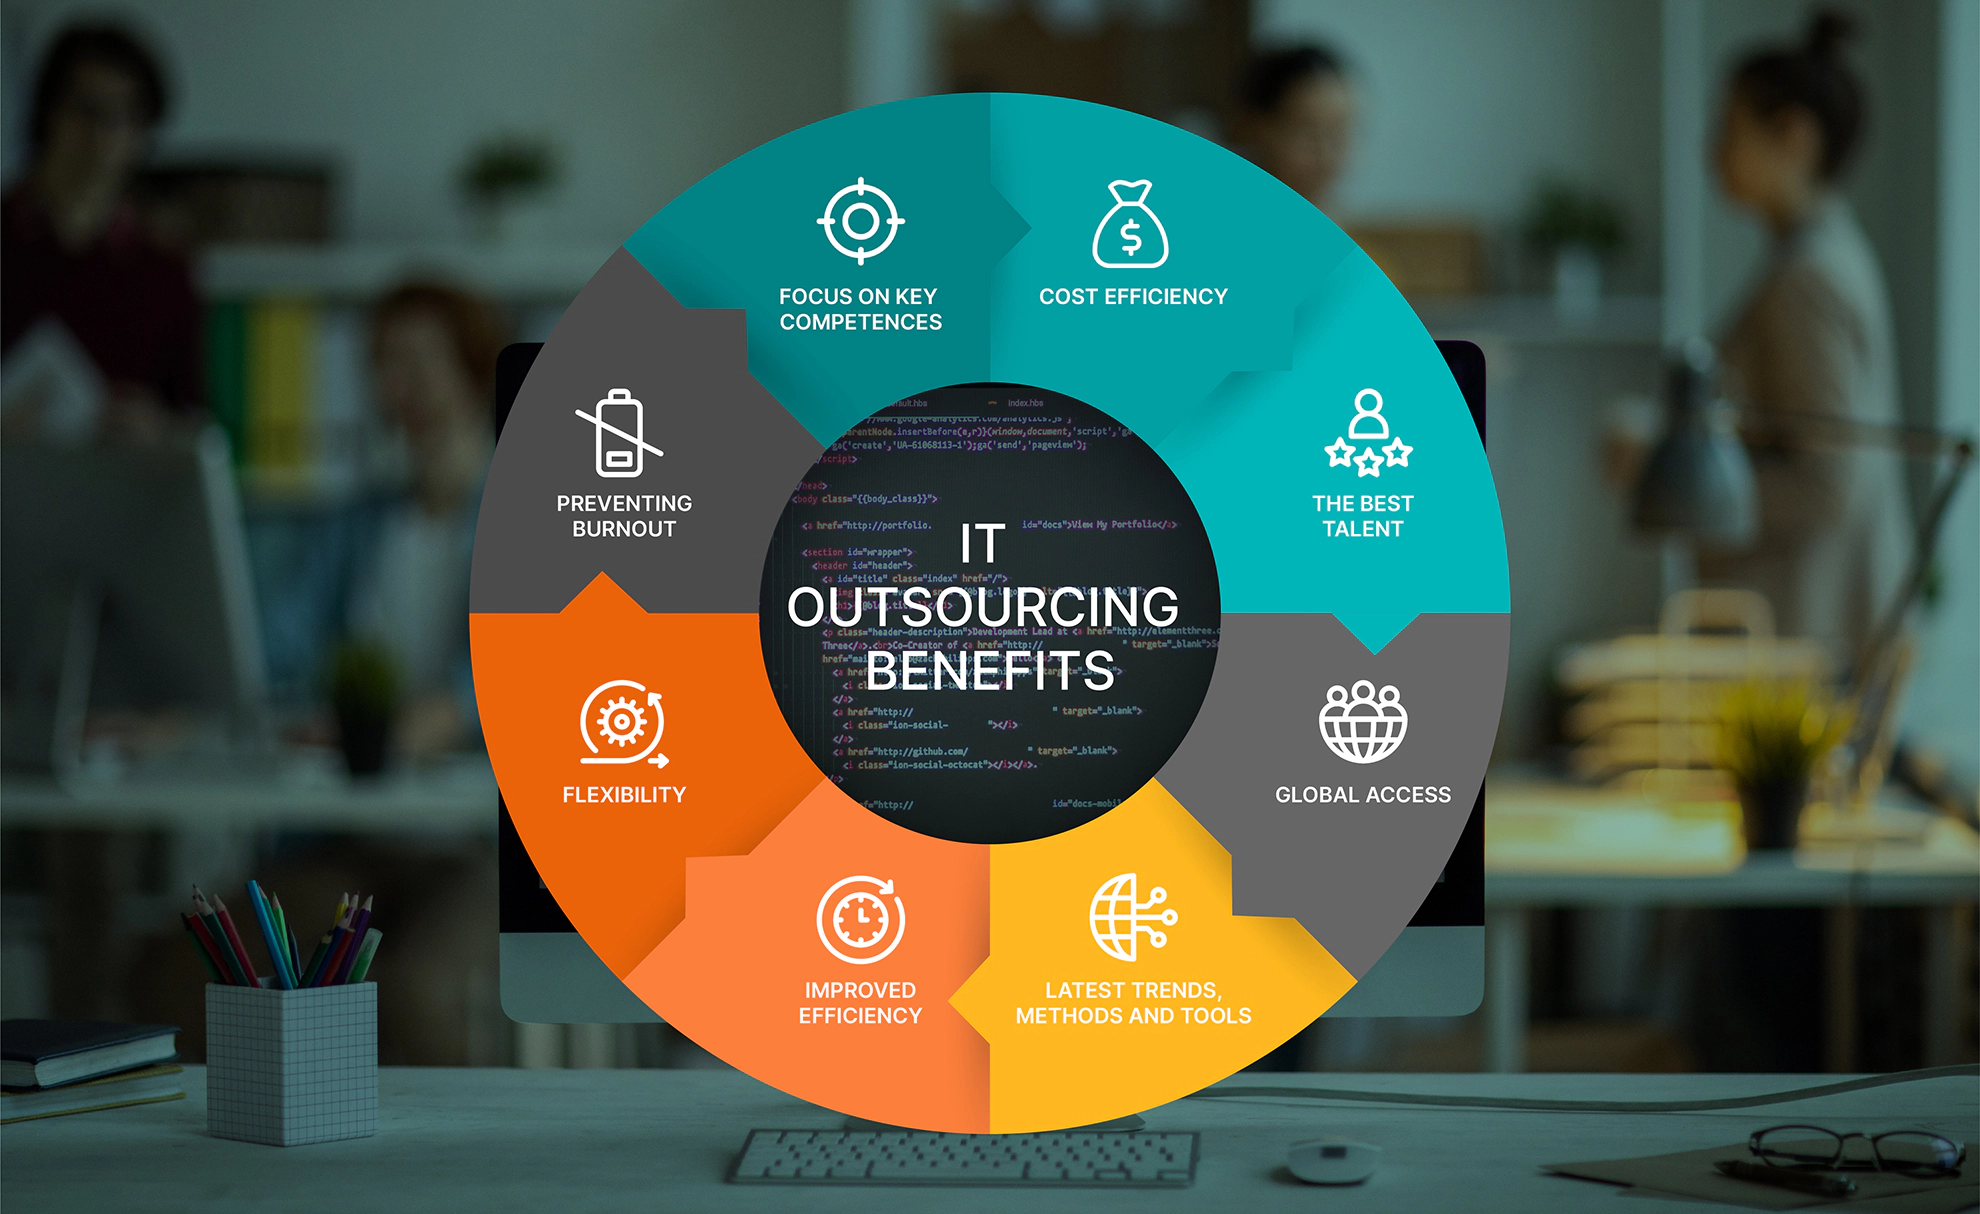 colorful circle diagram of it outsourcing benefits: focus on key competences; cost efficiency; the best talent; global access; latest trends, methods and tools; improved efficiency; flexibility; preventing burnout